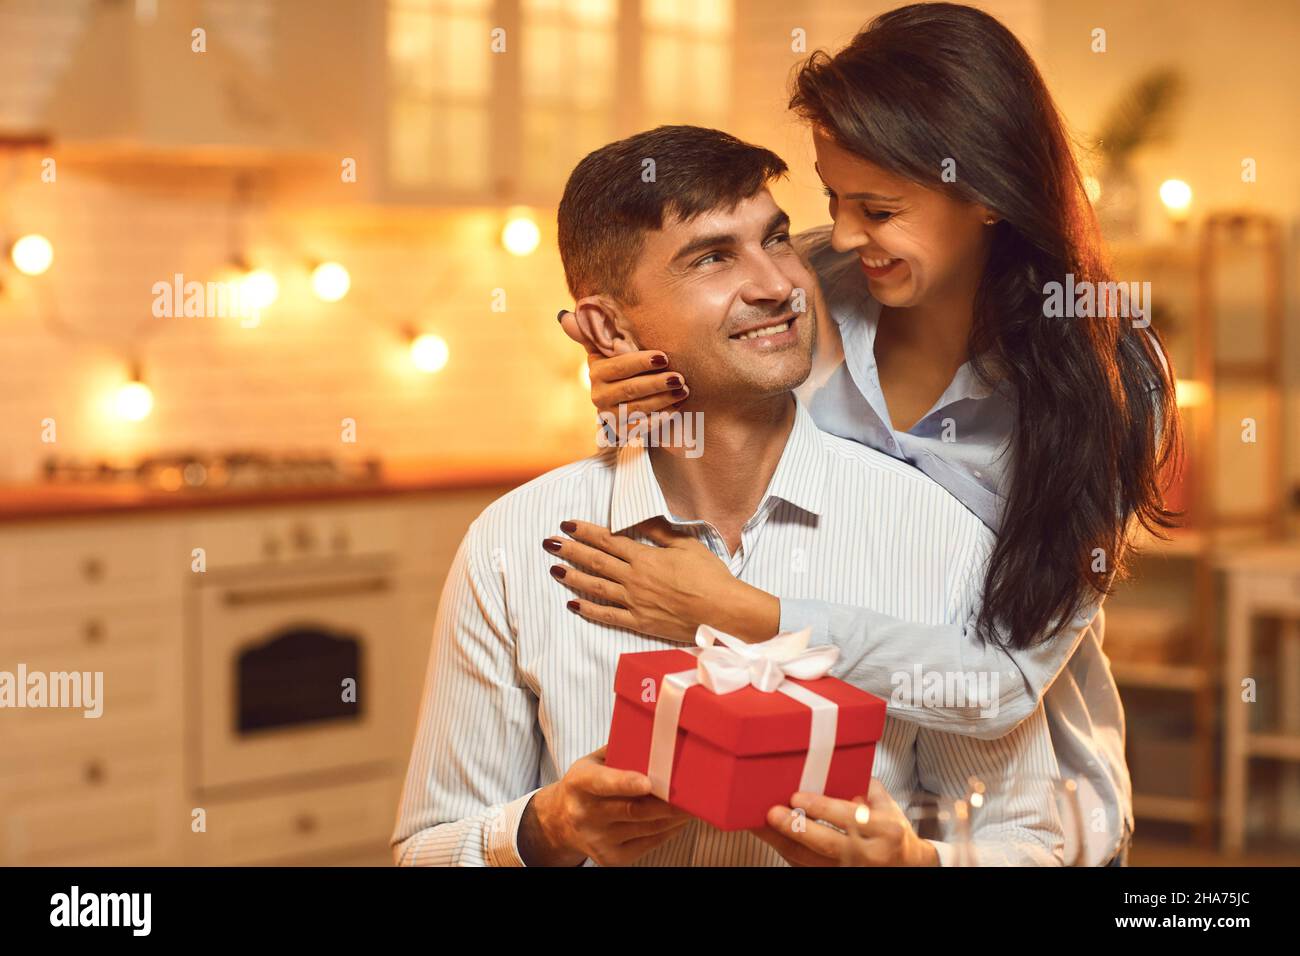 Joyful excited man received a gift from his girlfriend, who stands behind him and hugs him. Stock Photo